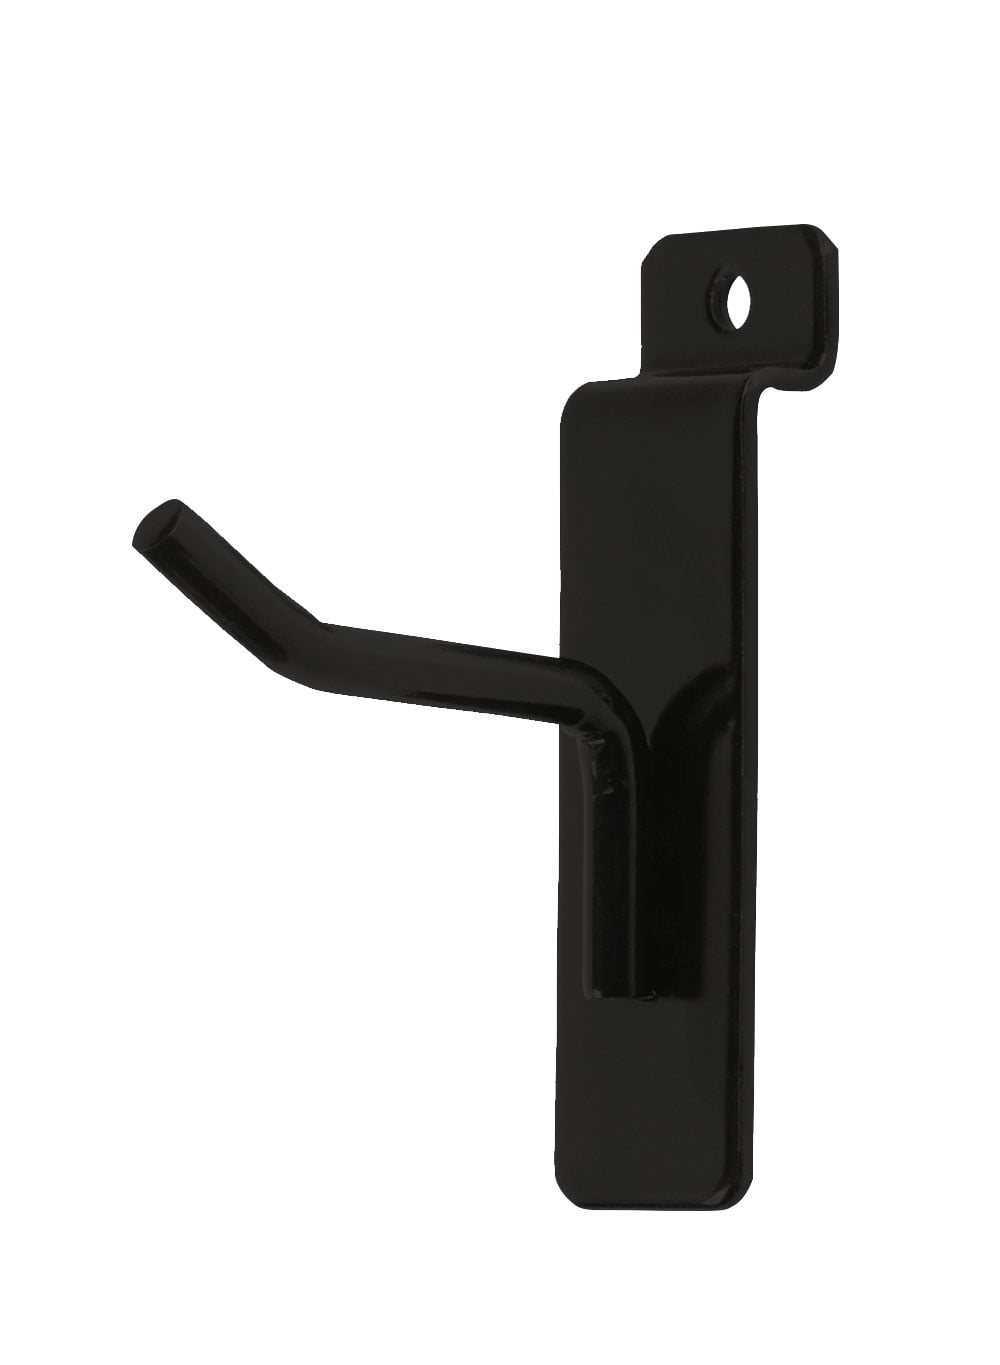  SSWBasics 6 inch Black Peg Hook for Wire Grid - Pack of 25 :  Industrial & Scientific